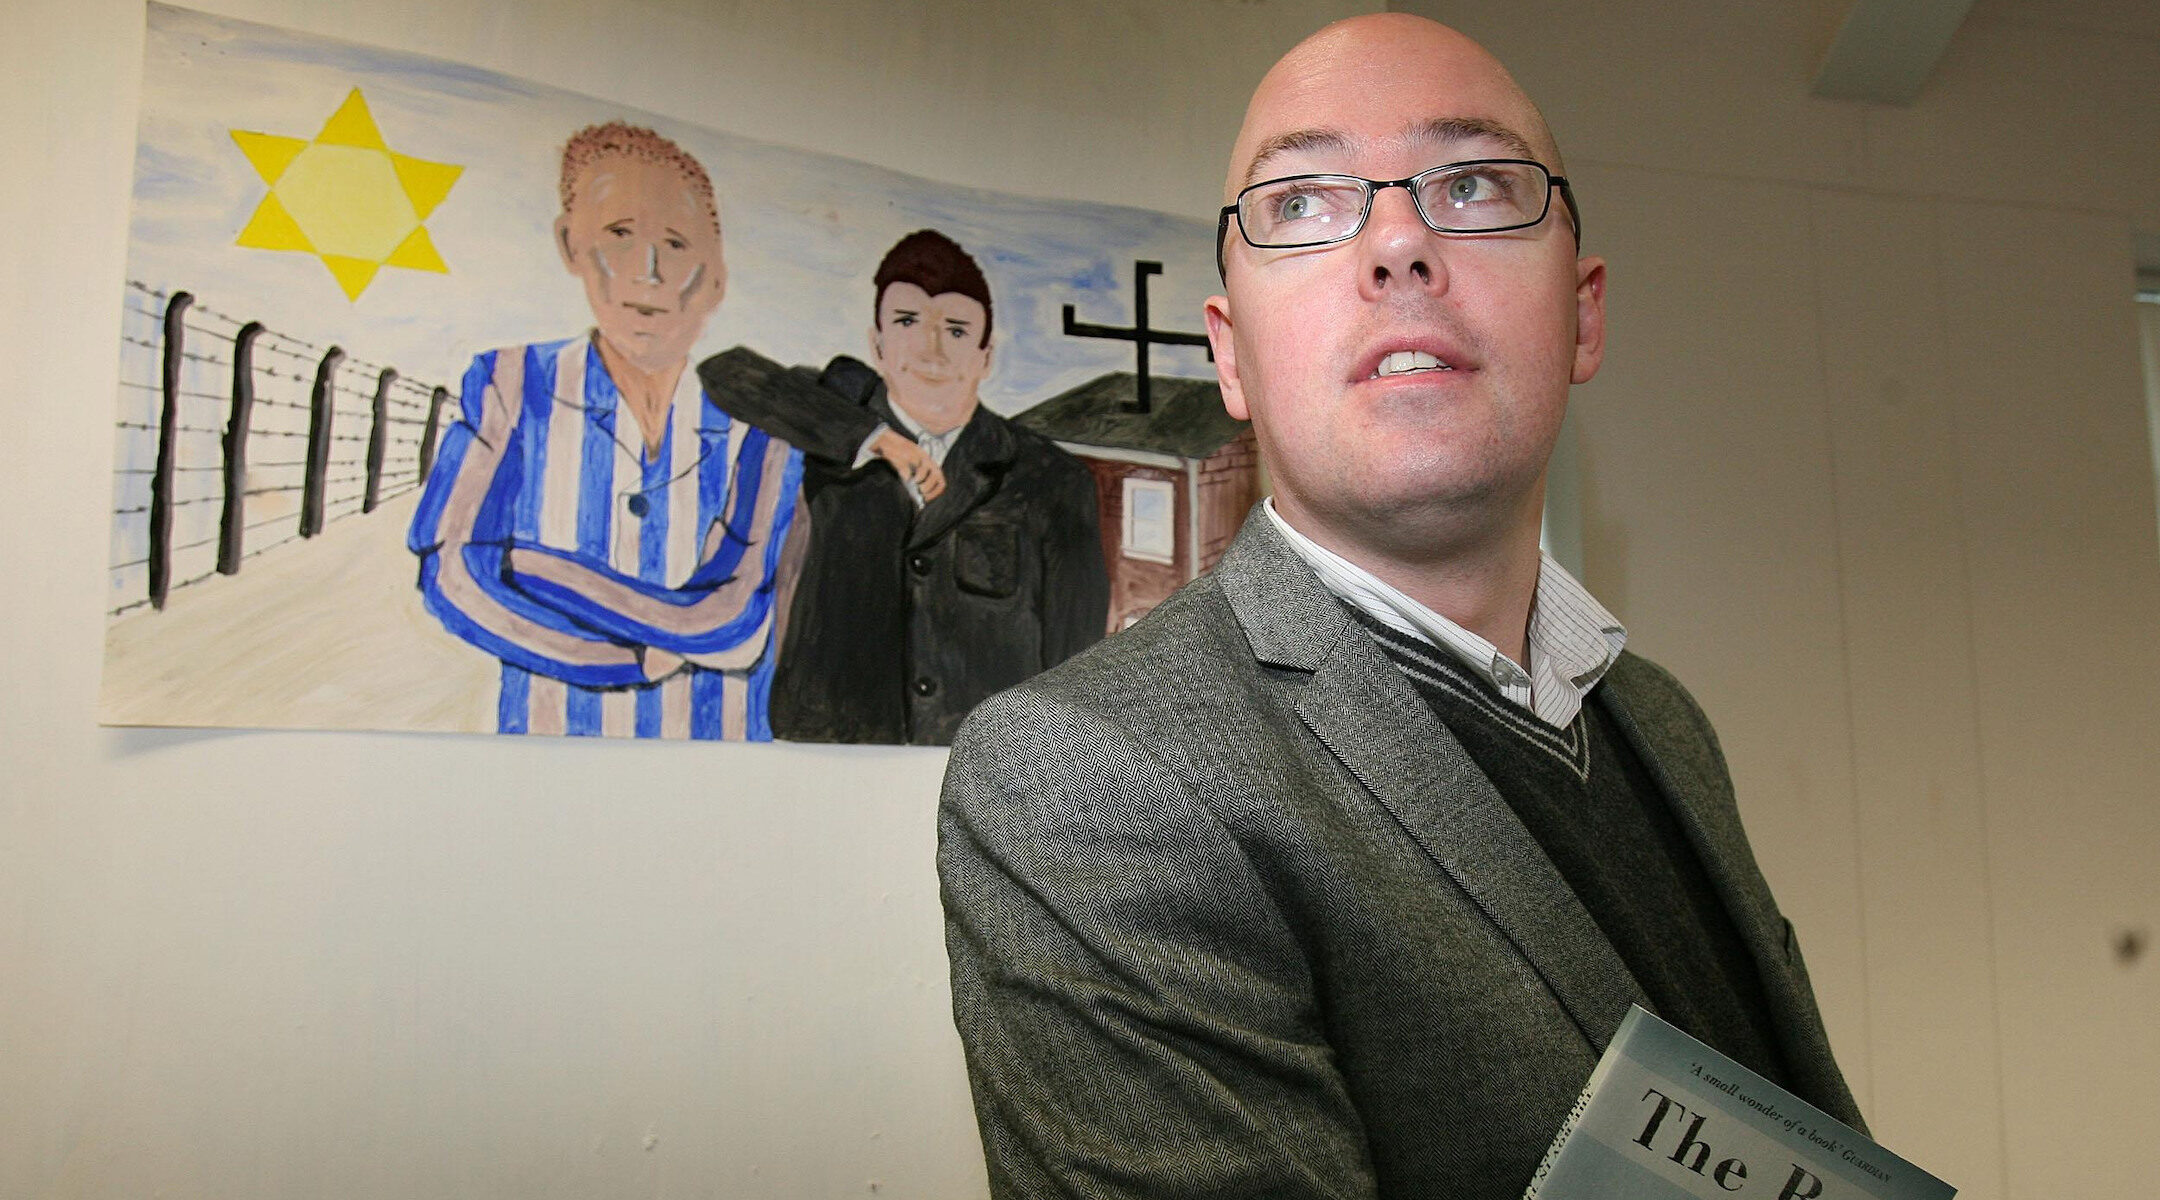 Man poses with book in front of children's drawing of Auschwitz